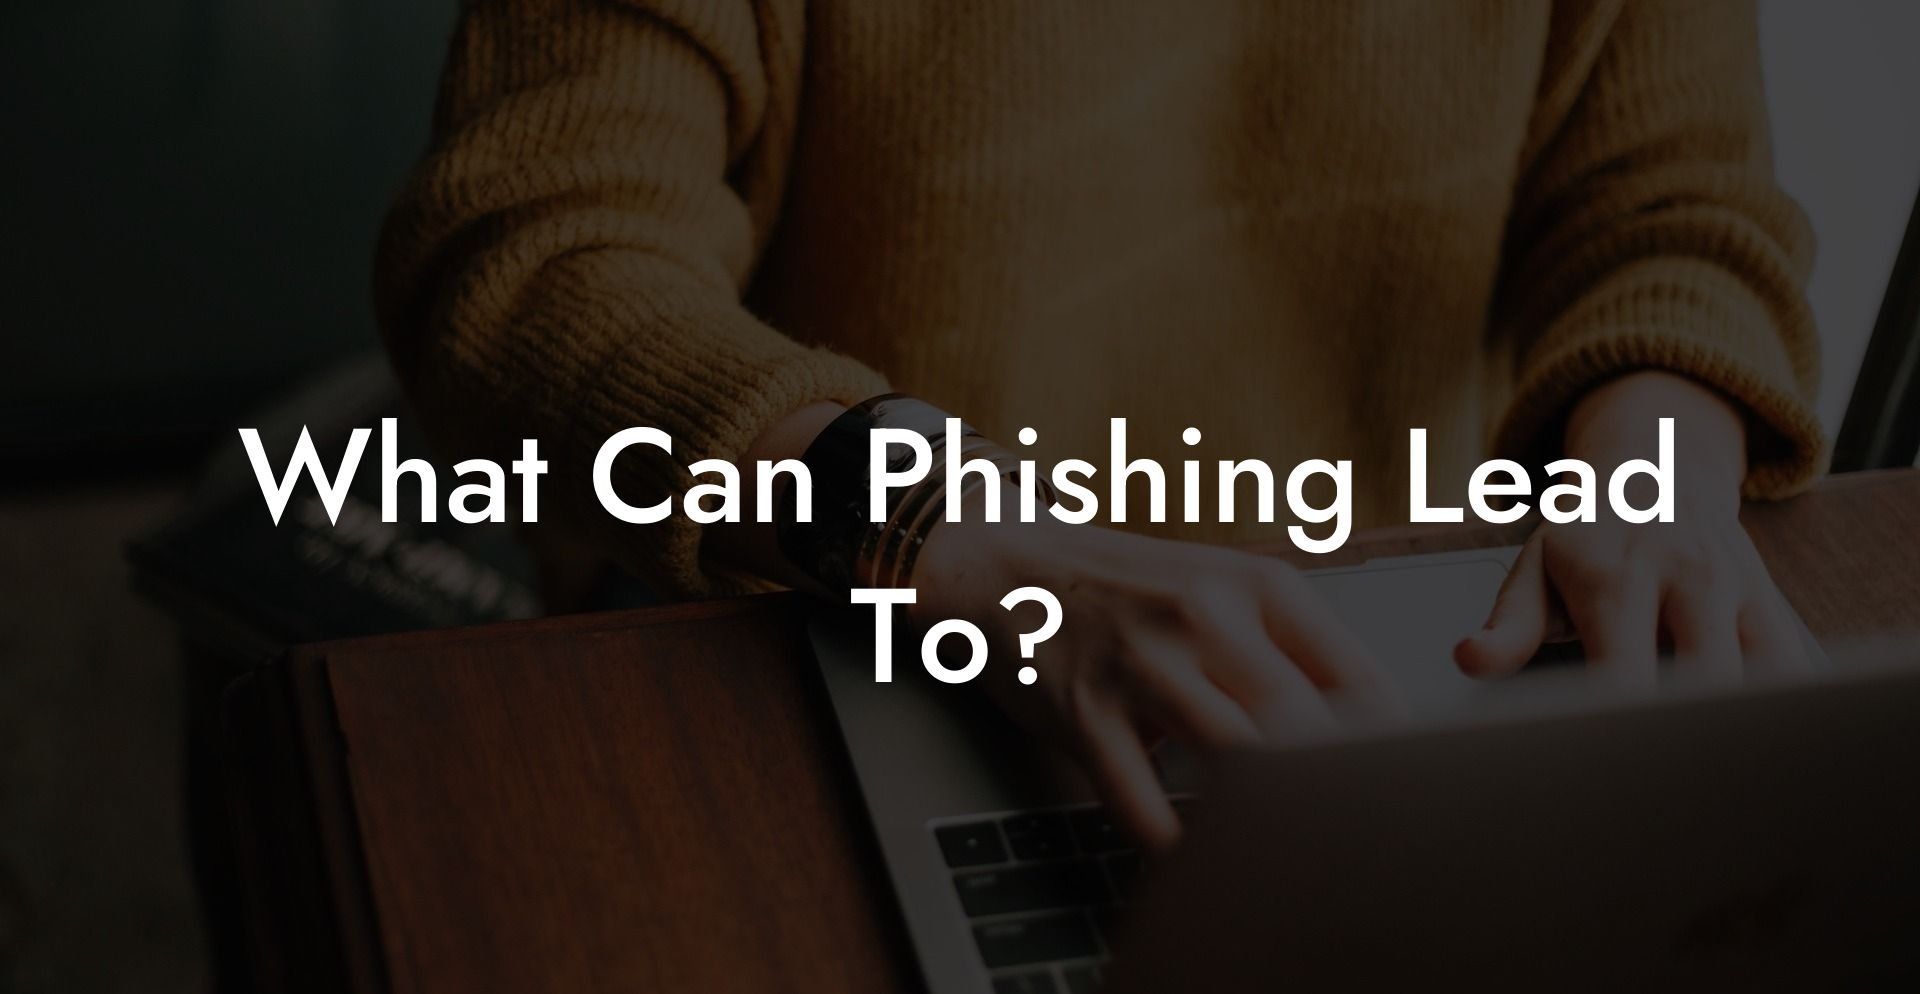 What Can Phishing Lead To?